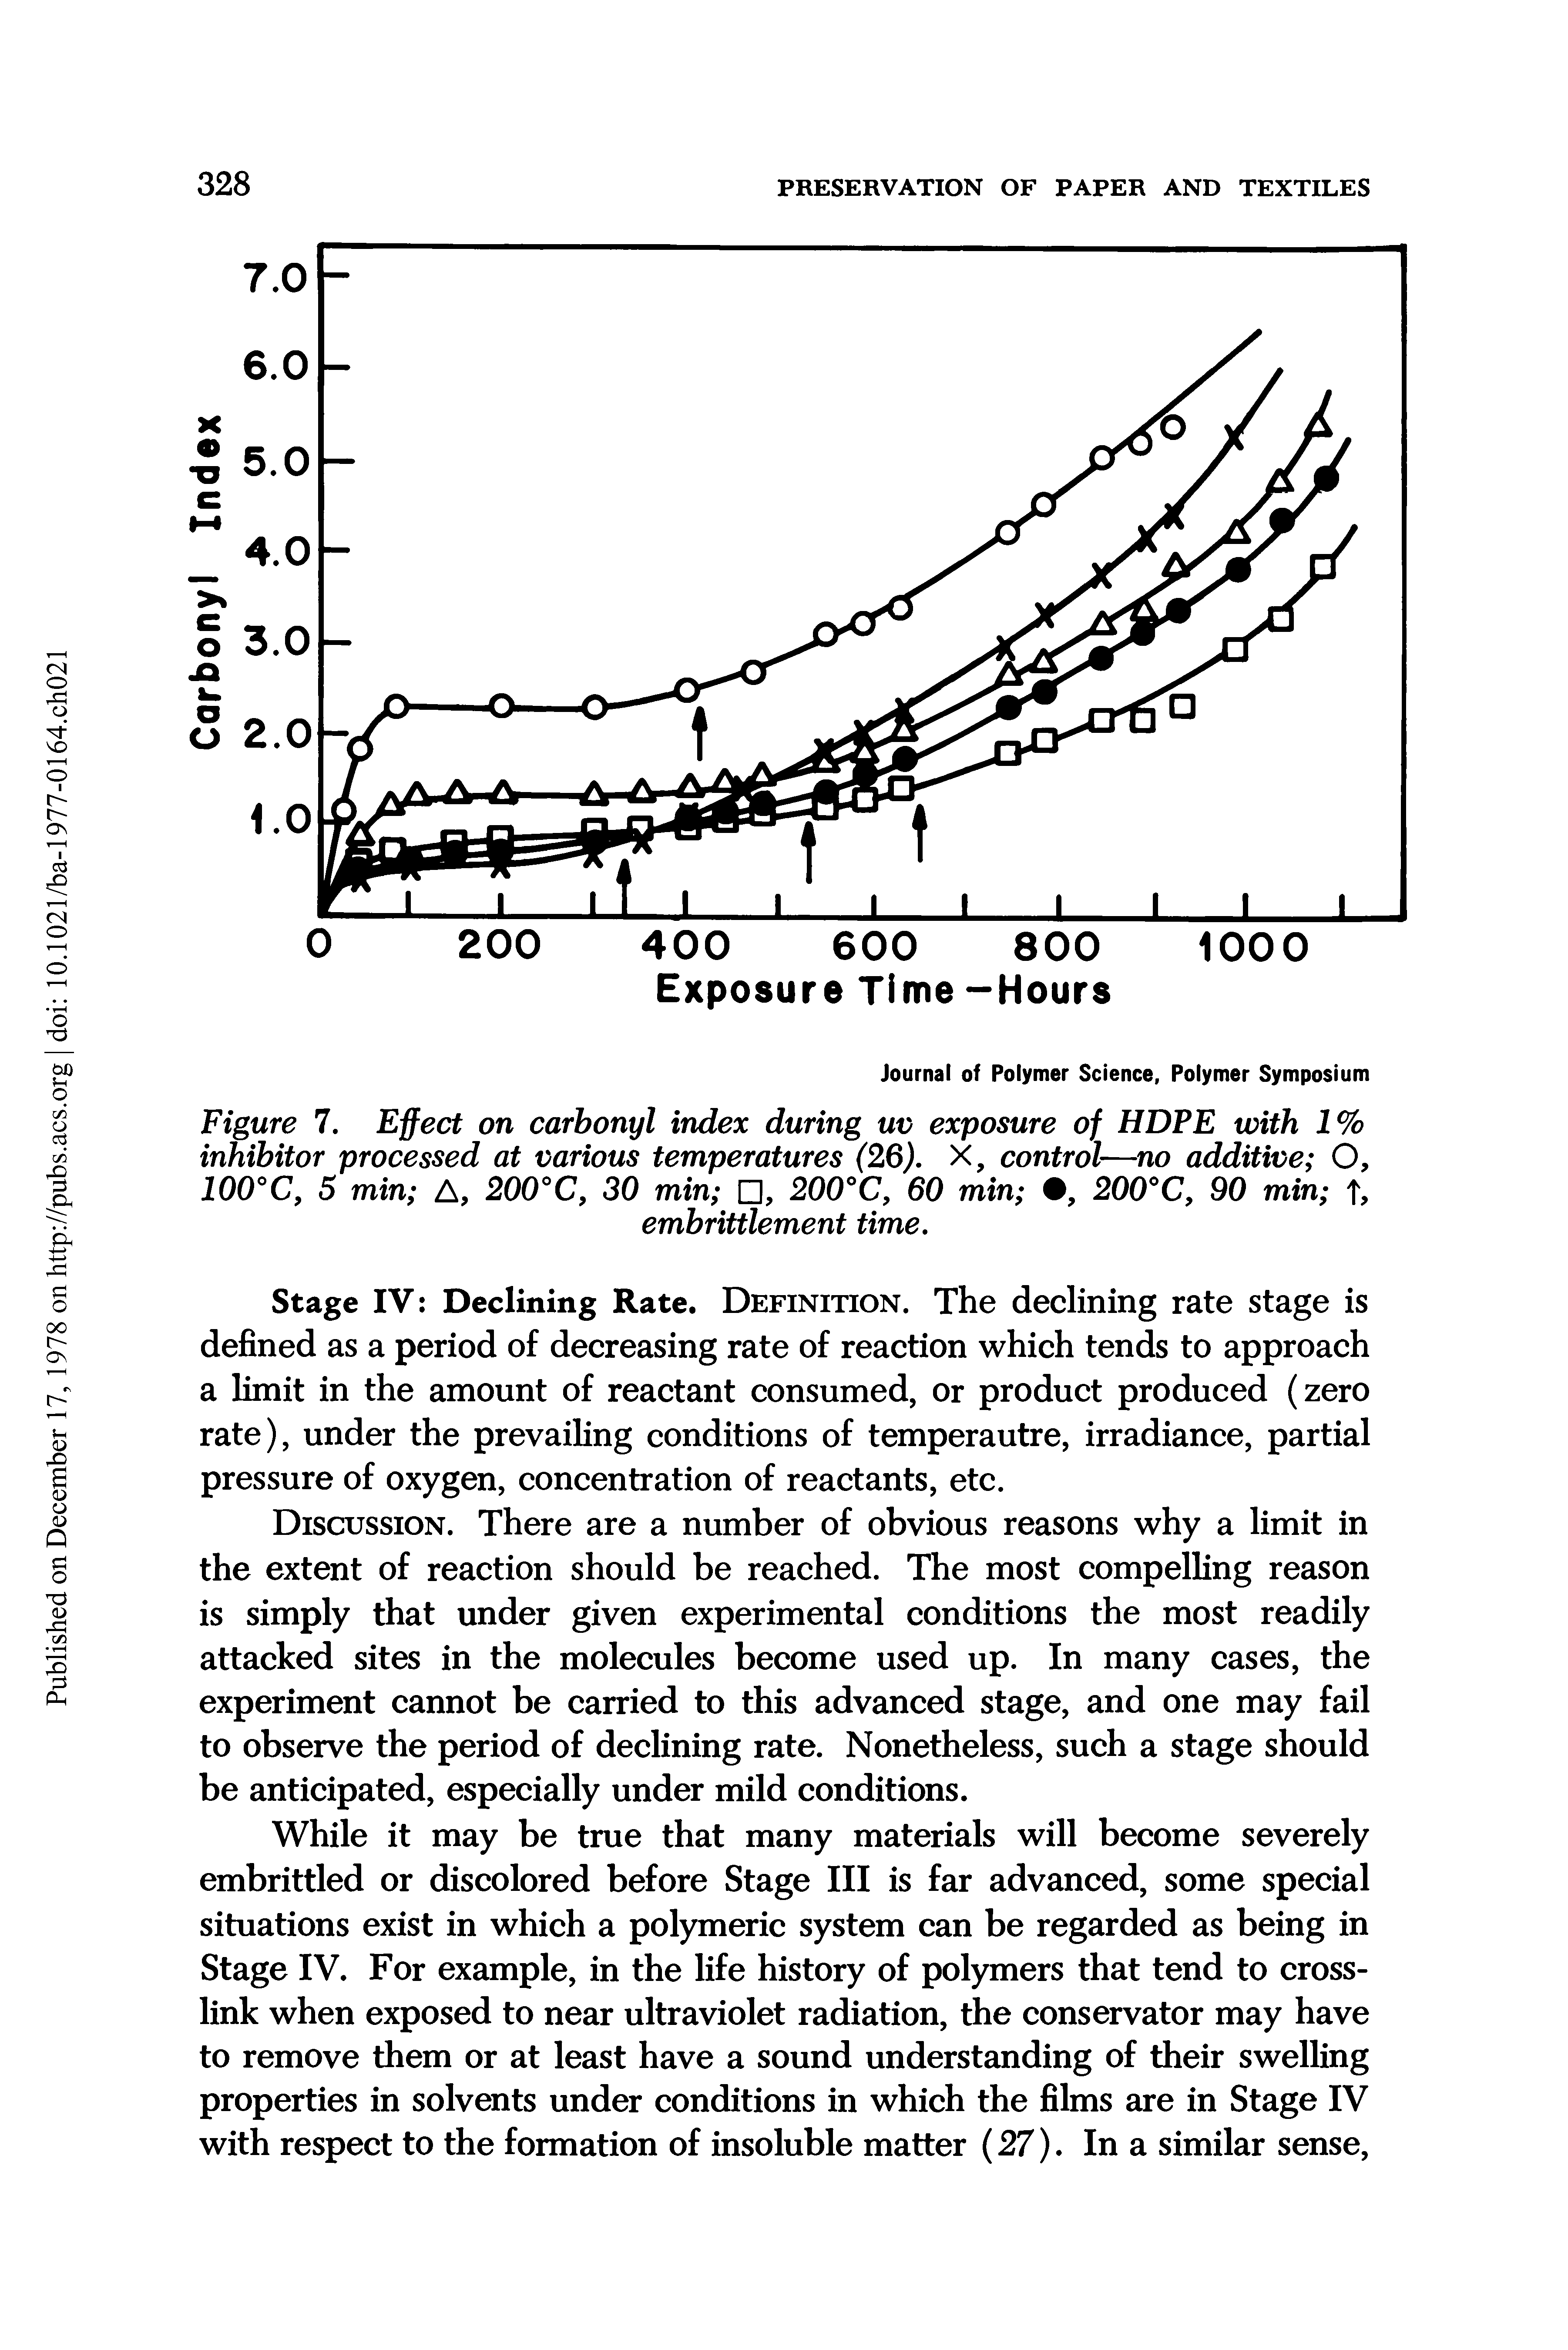 Figure 7. Effect on carbonyl index during uv exposure of HDPE with 1% inhibitor processed at various temperatures (26). X, control—no additive O, I00°C, 5 min A, 200°C, 30 min , 200°C, 60 min , 200°C, 90 min t,...